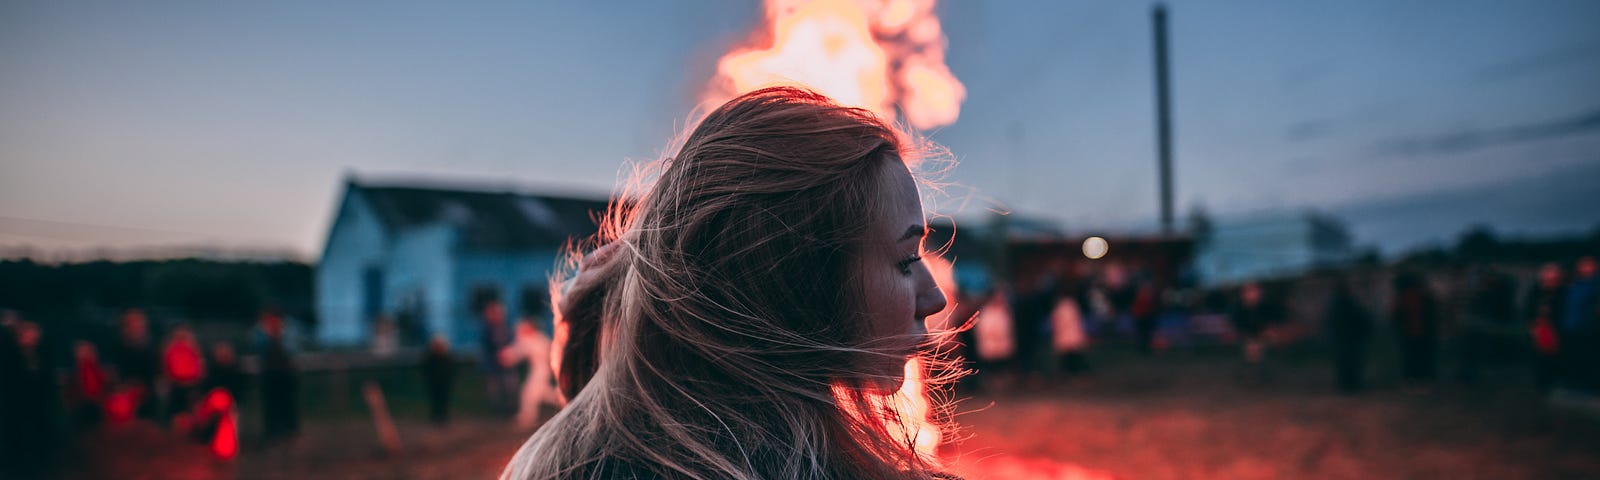 blonde woman with back to the camera standing outside, in front of a bonfire with a house behind it in the far distance